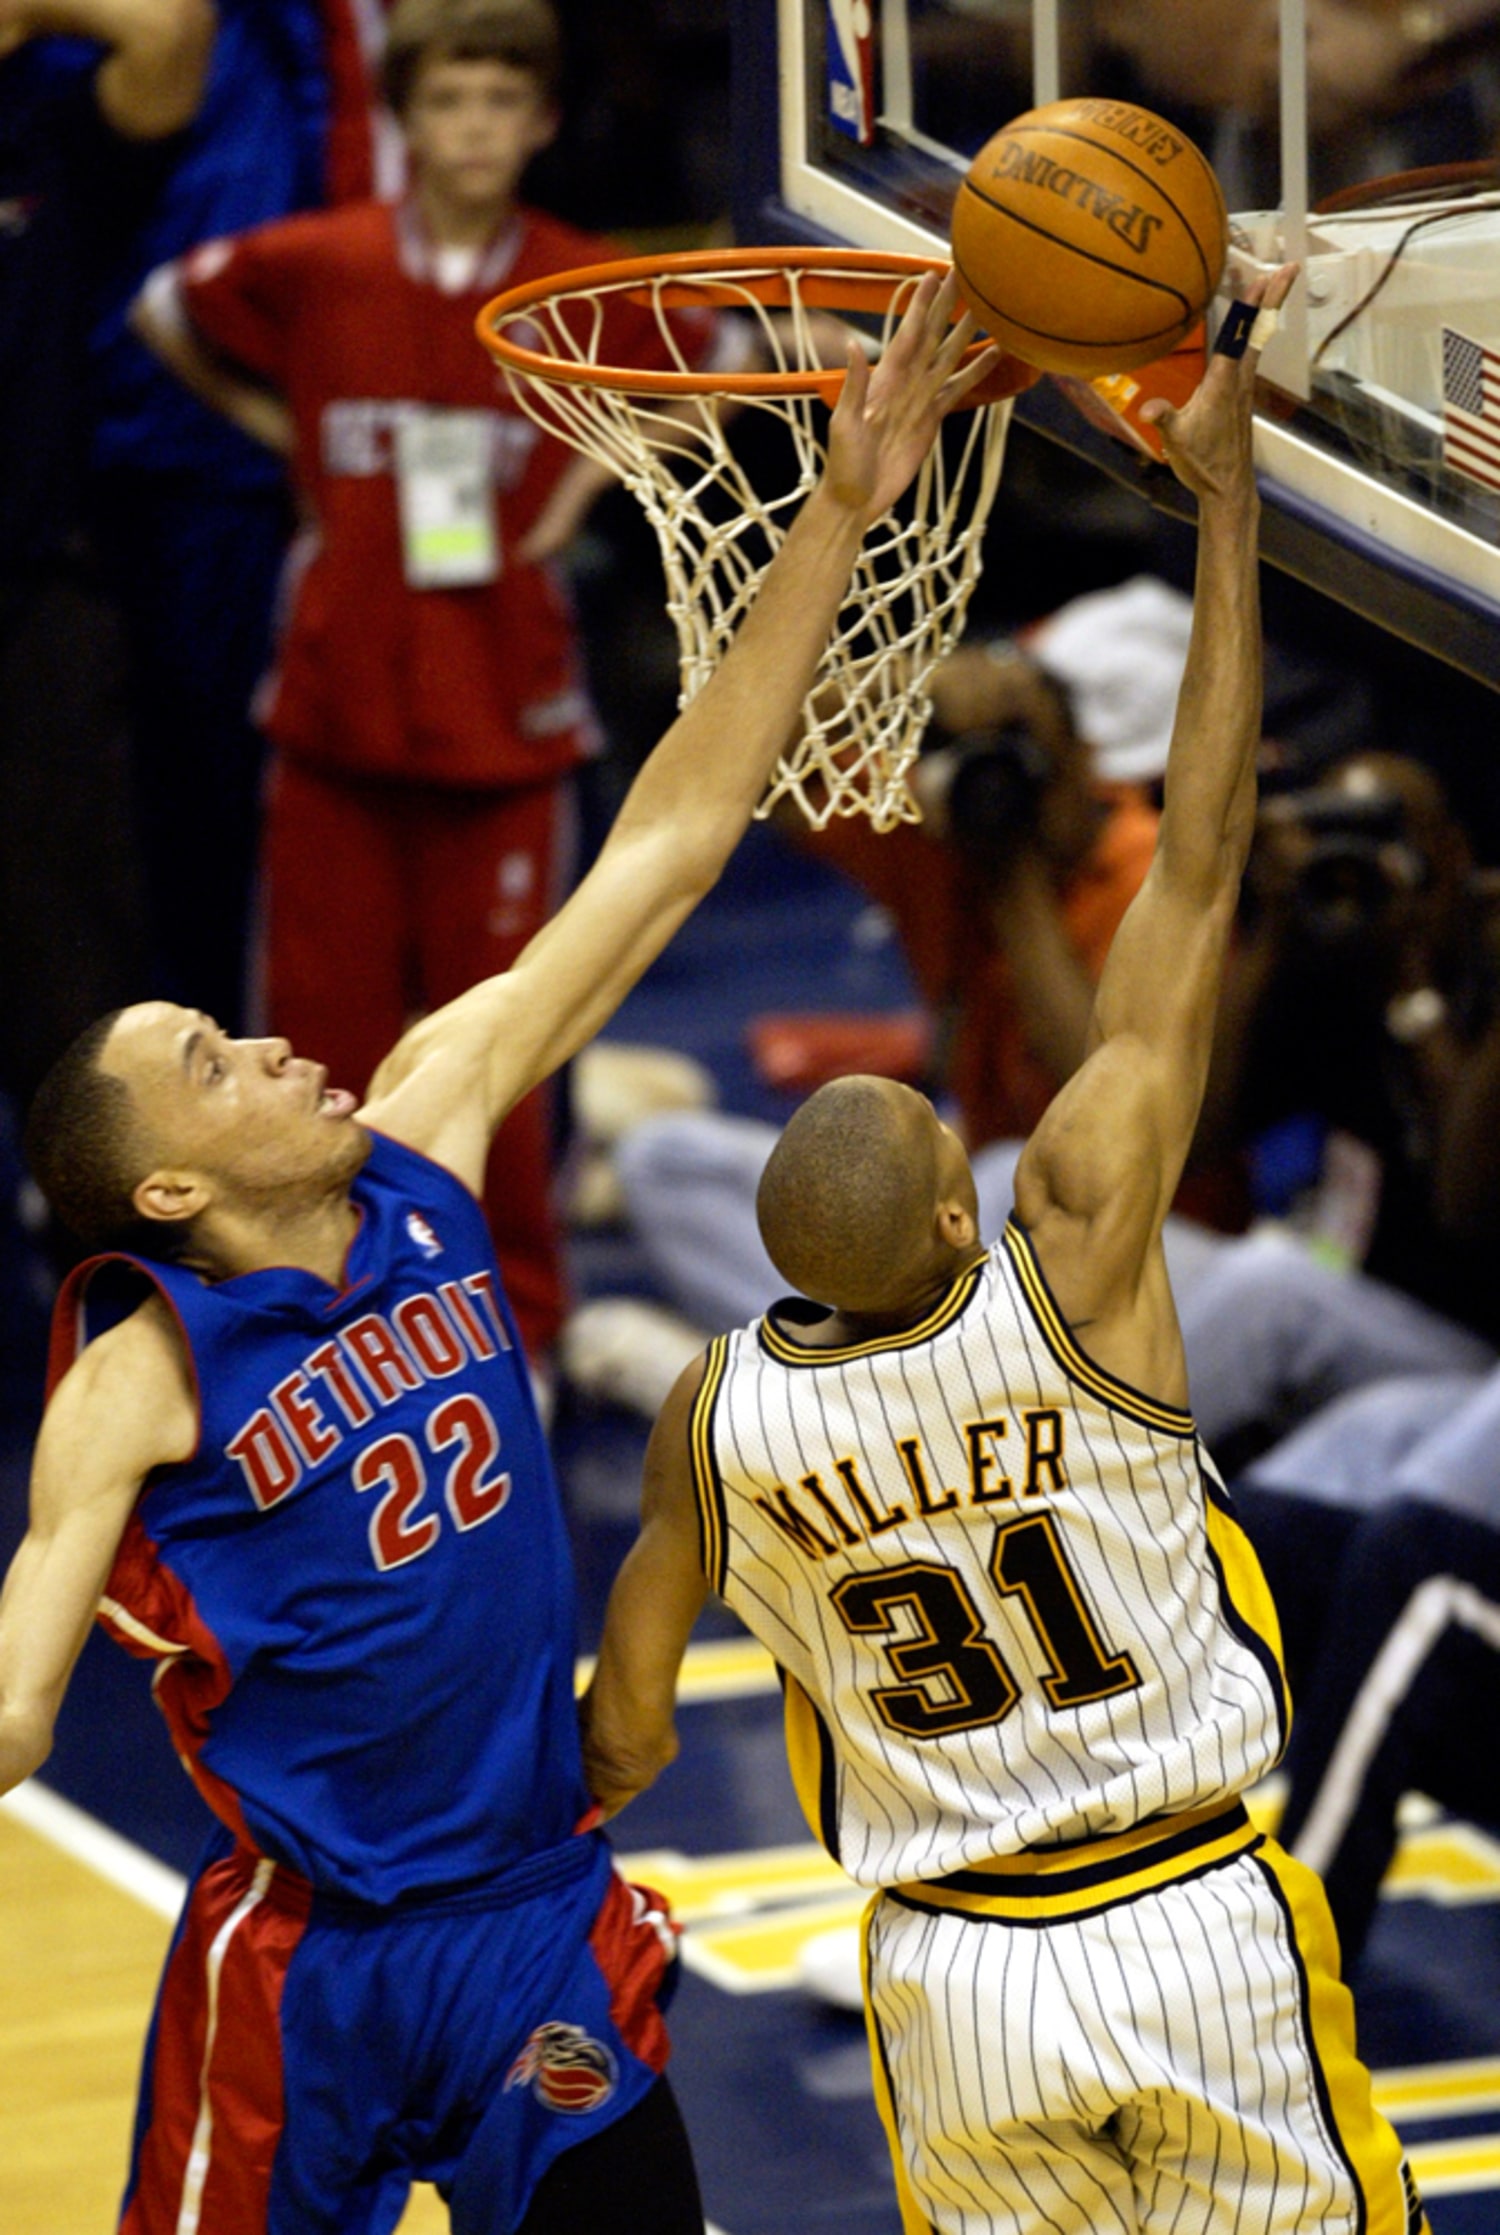 Great article from ESPN on Tayshaun Prince